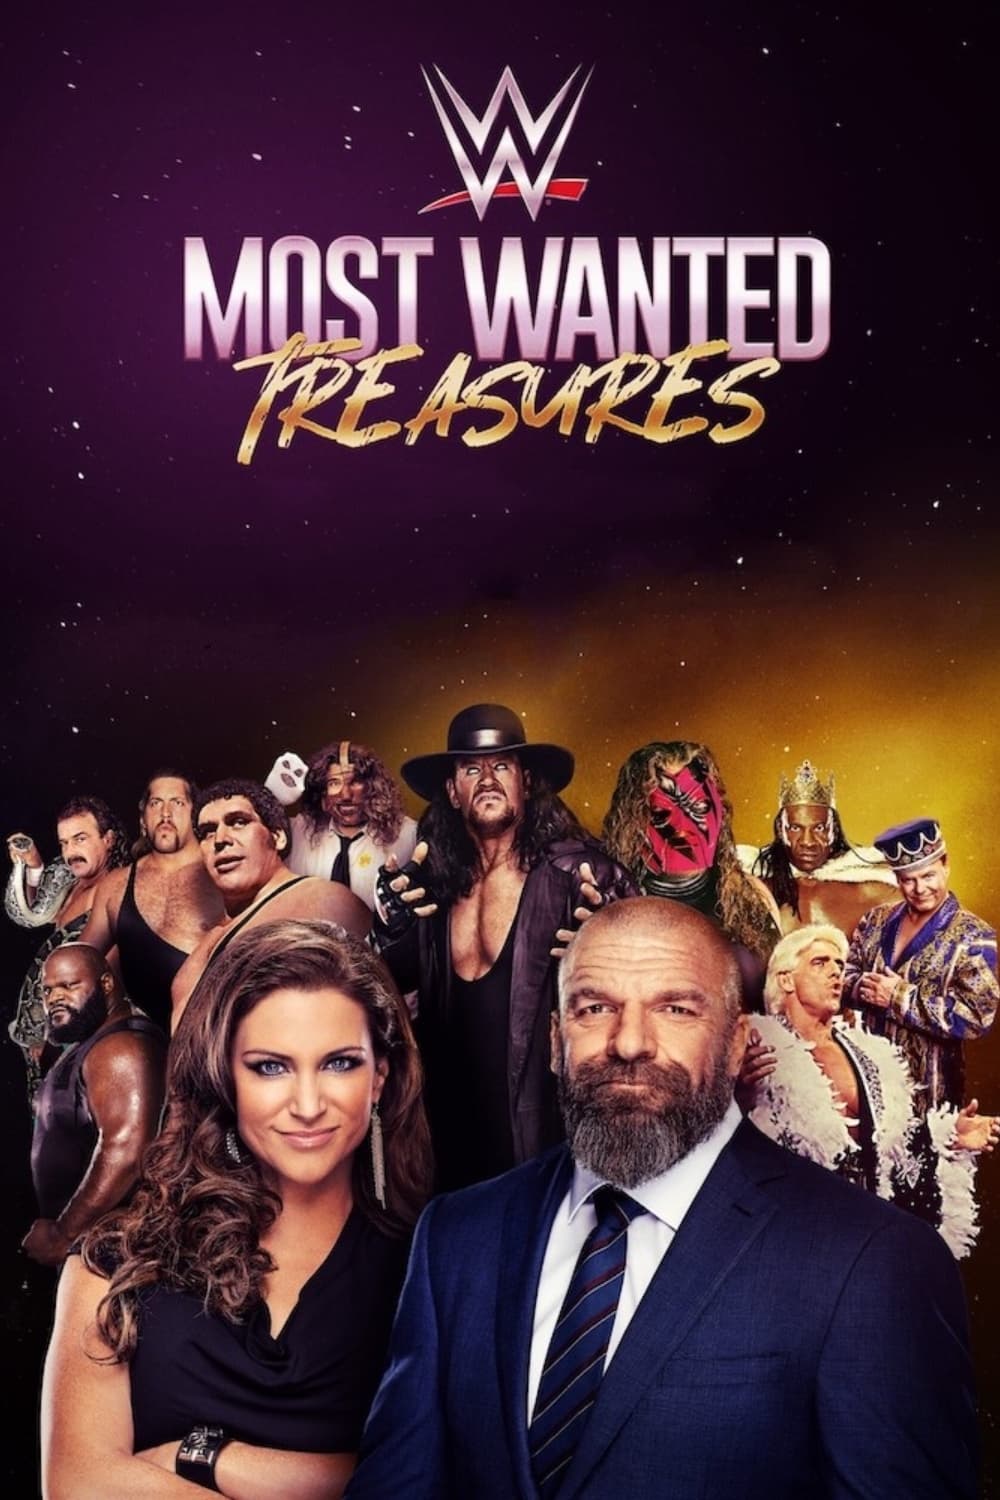 WWE's Most Wanted Treasures TV Shows About Treasure